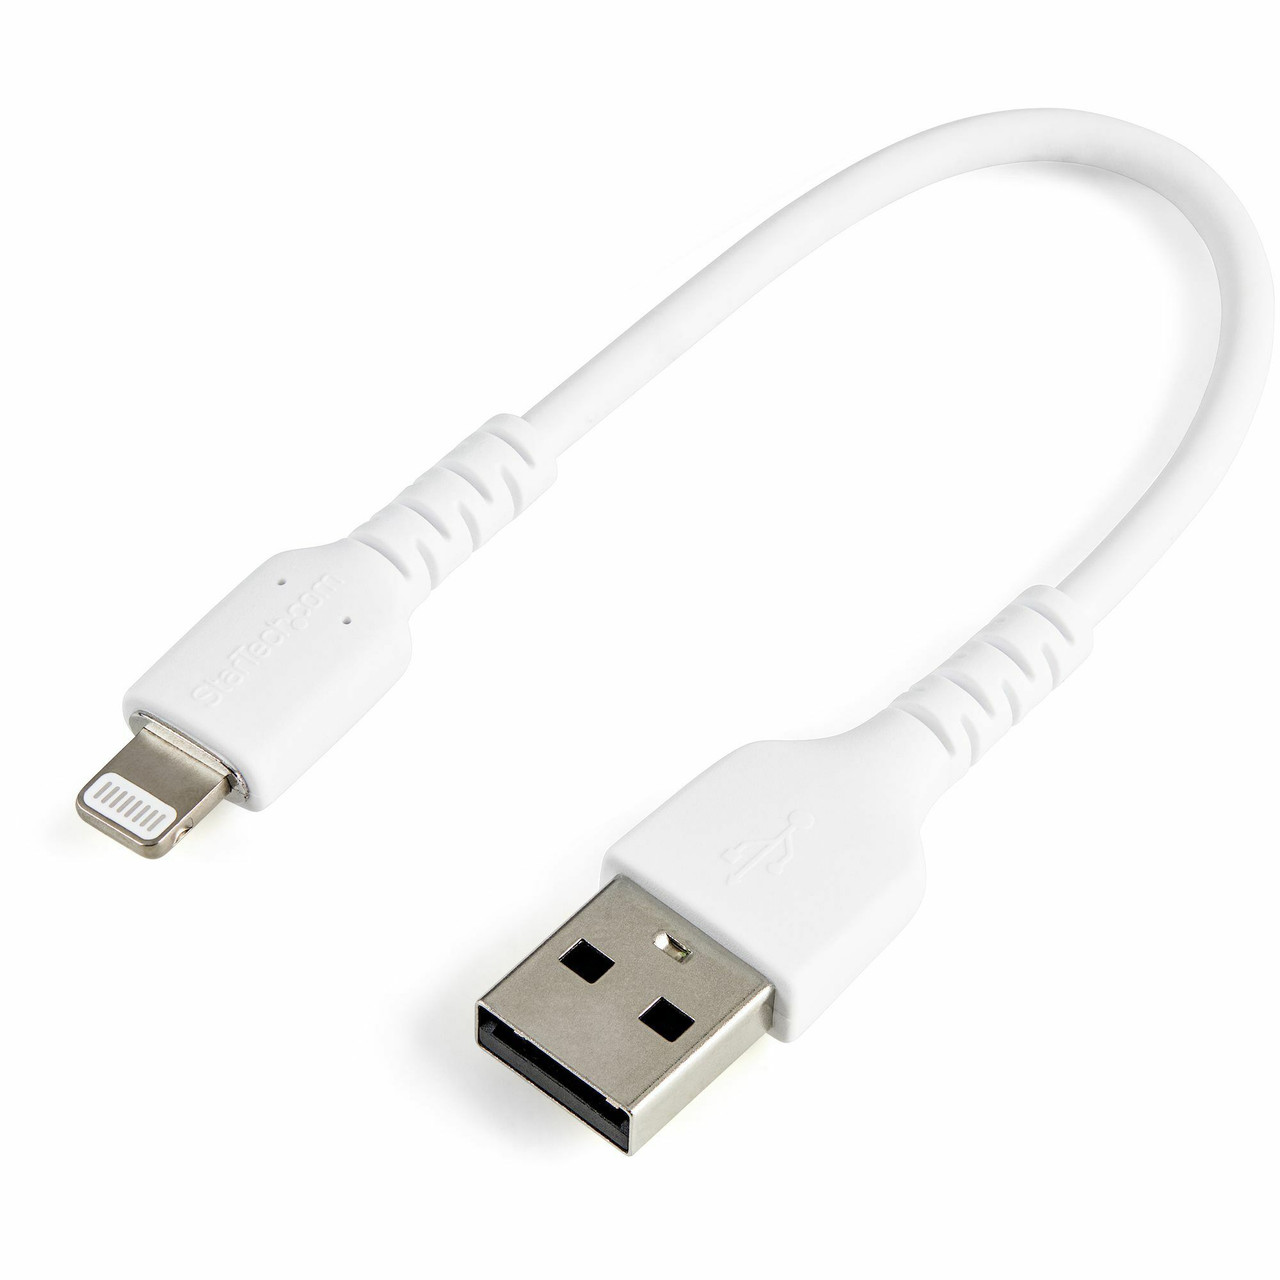 levering aan huis leider Of anders StarTech.com 6 inch/15cm Durable White USB-A to Lightning Cable, Rugged  Heavy Duty Charging/Sync Cable for Apple iPhone/iPad MFi Certified